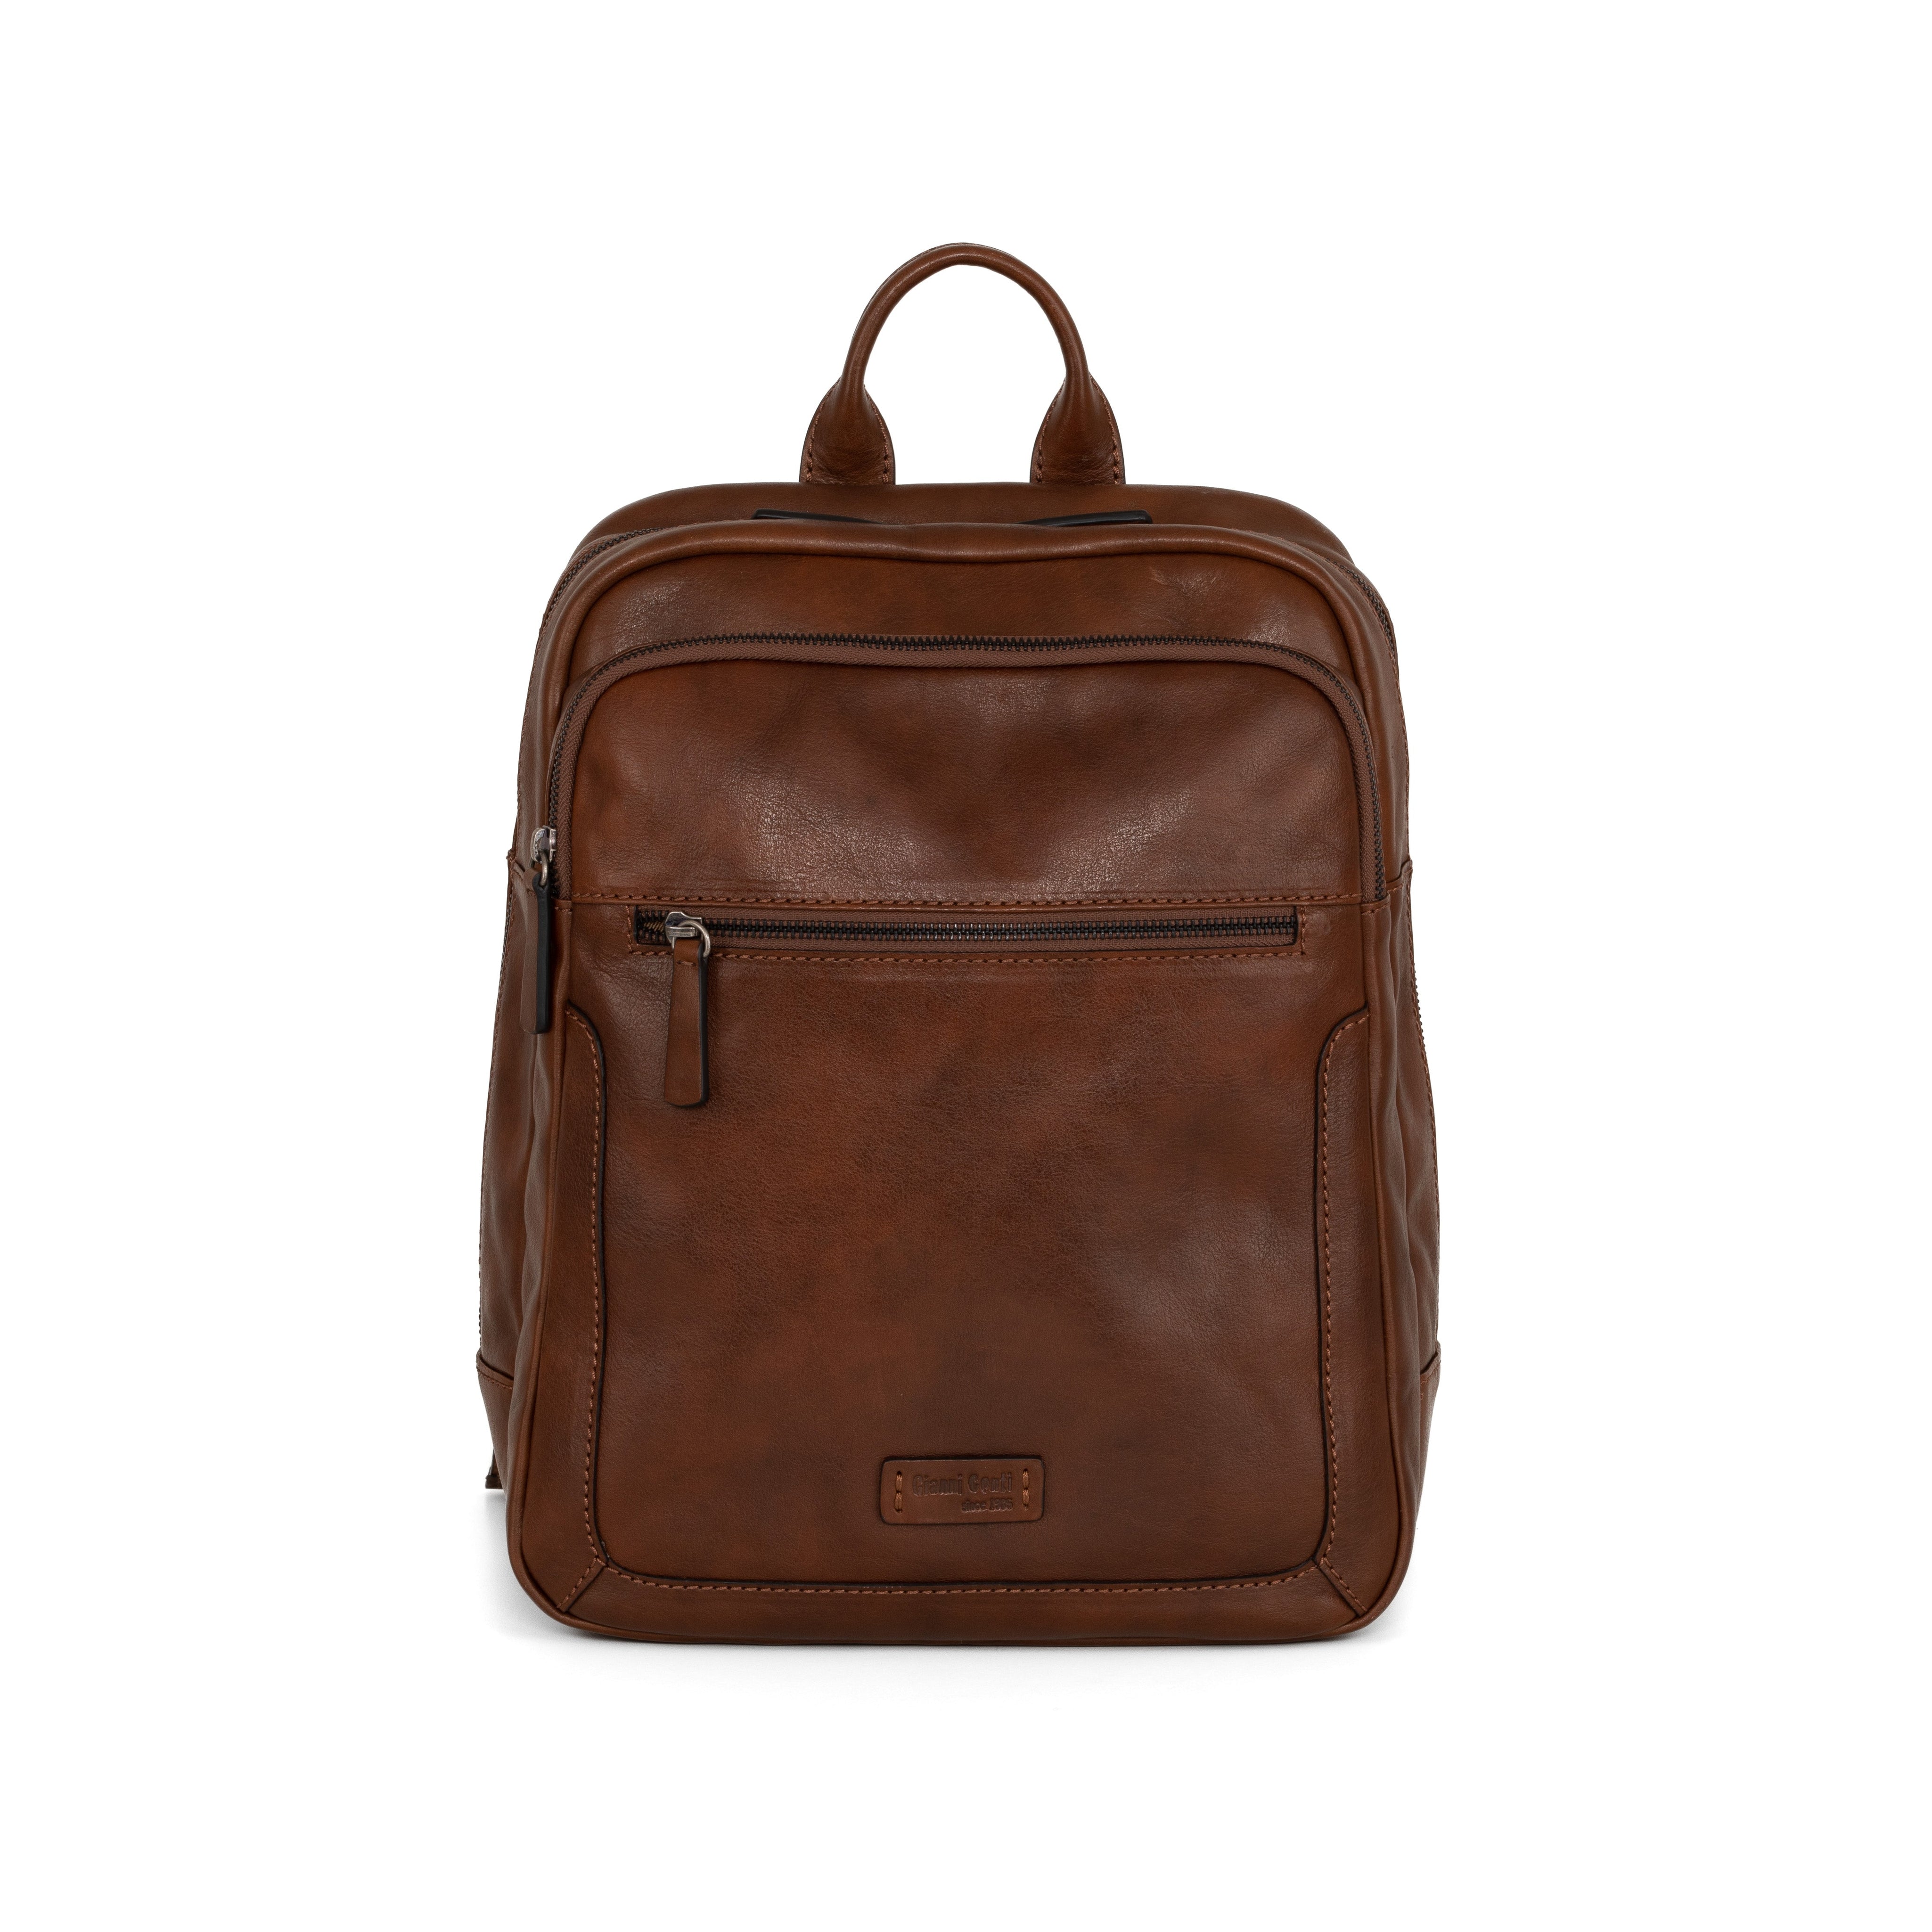 Gianni Conti Roberto Vegetable-Tanned Leather Bag